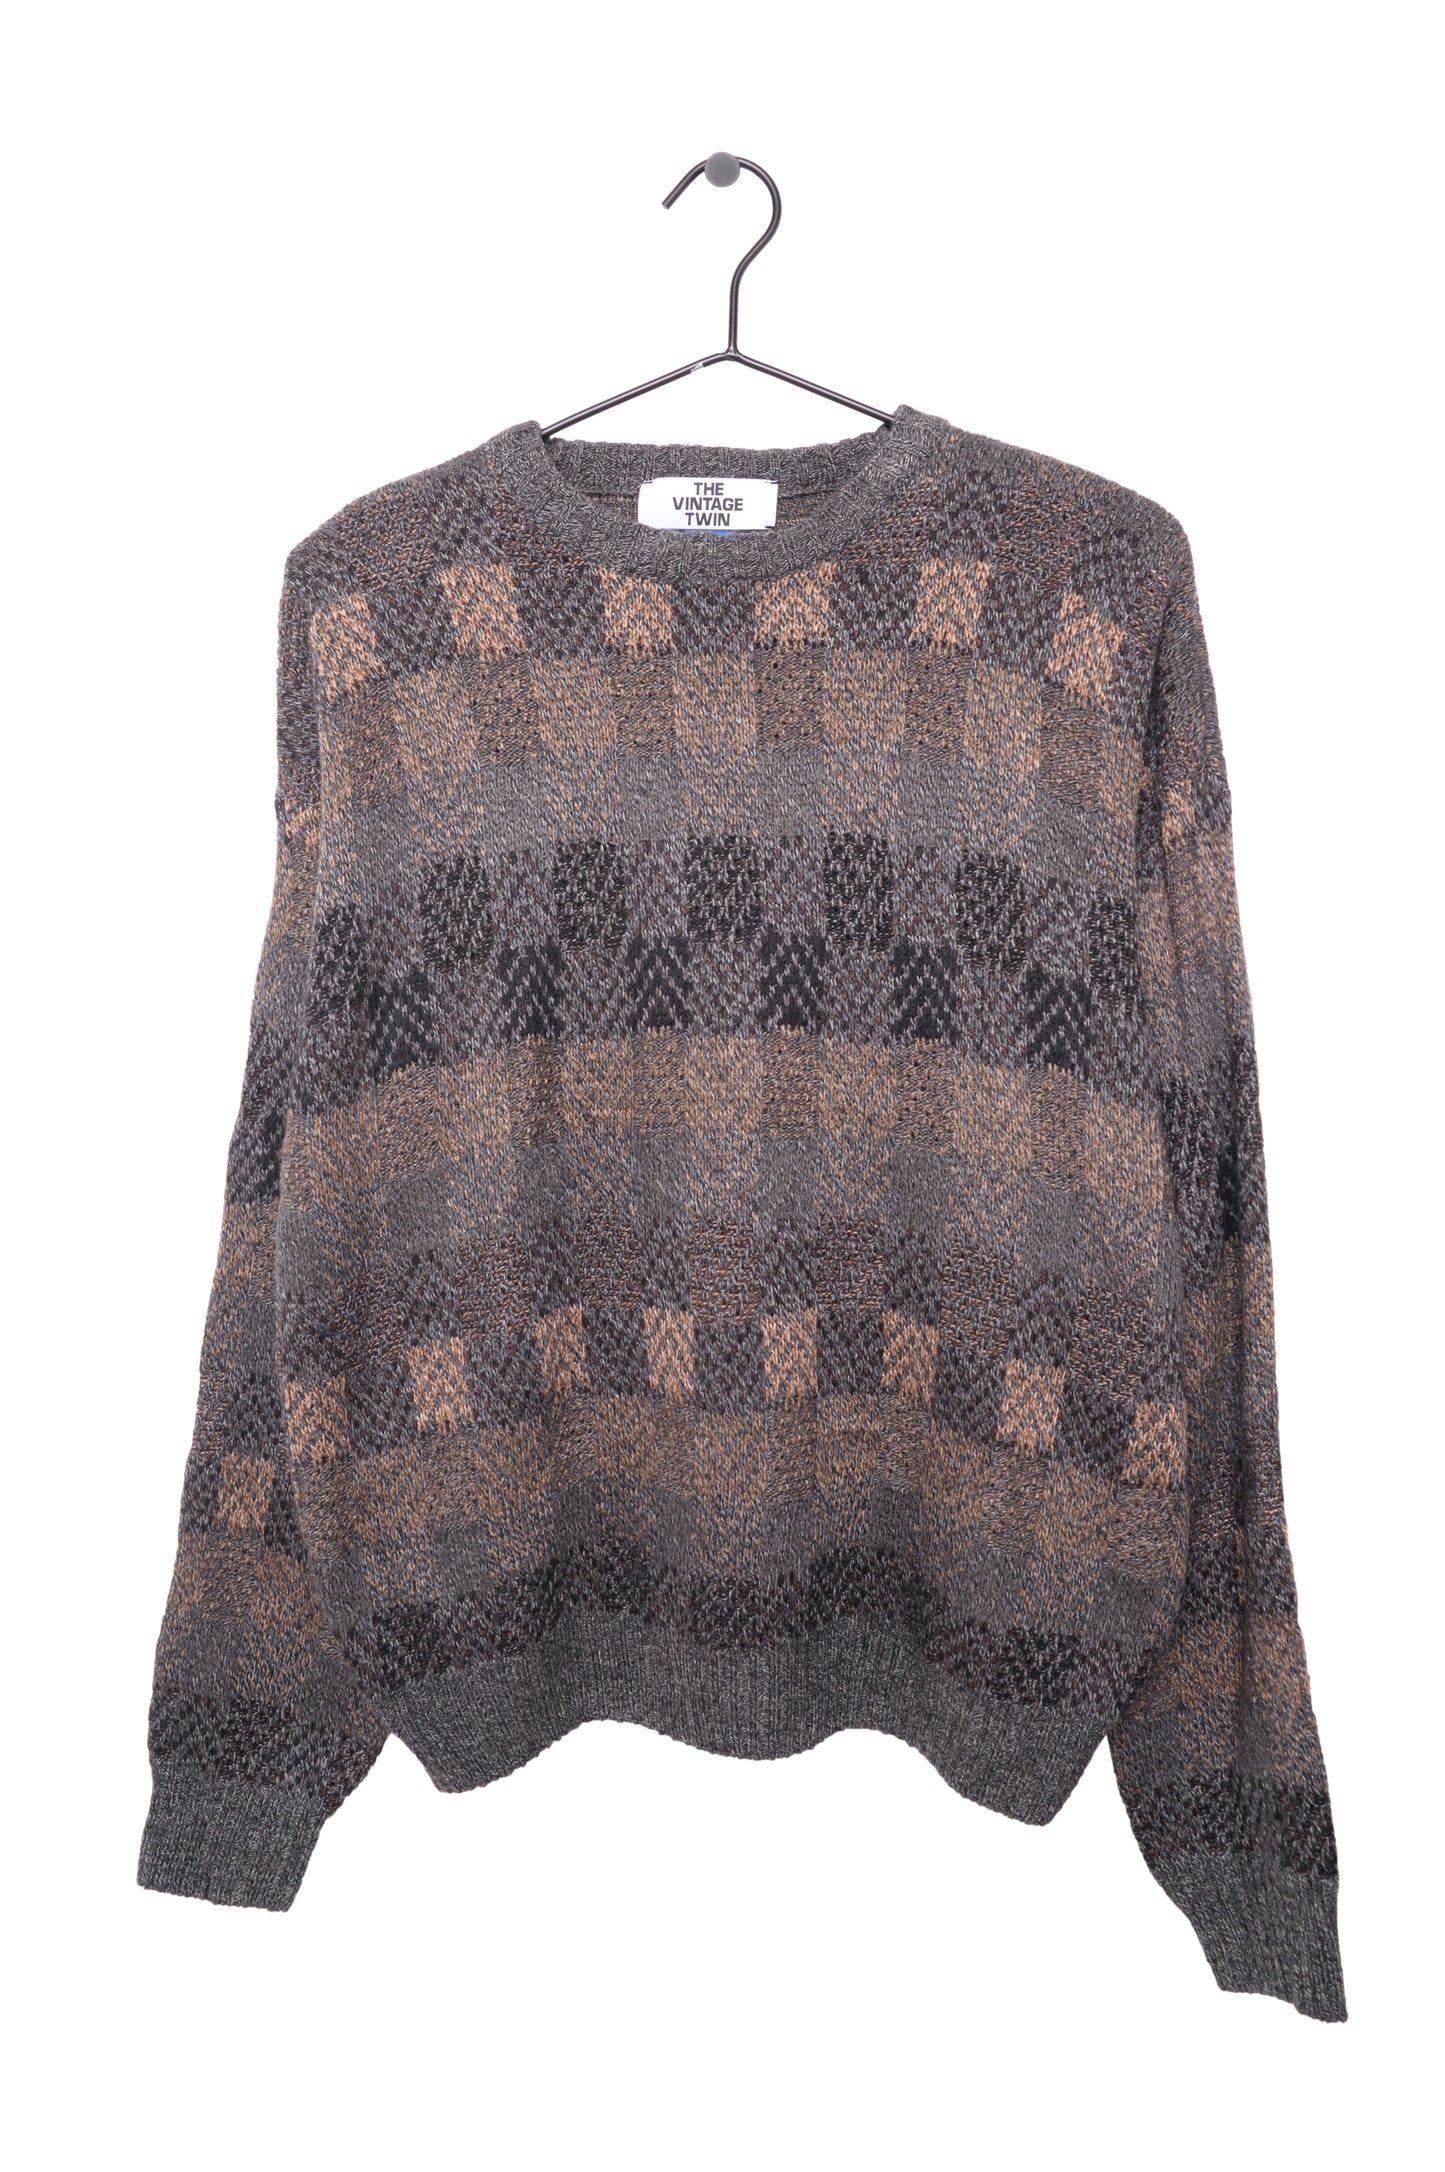 Grayscale Squares Sweater